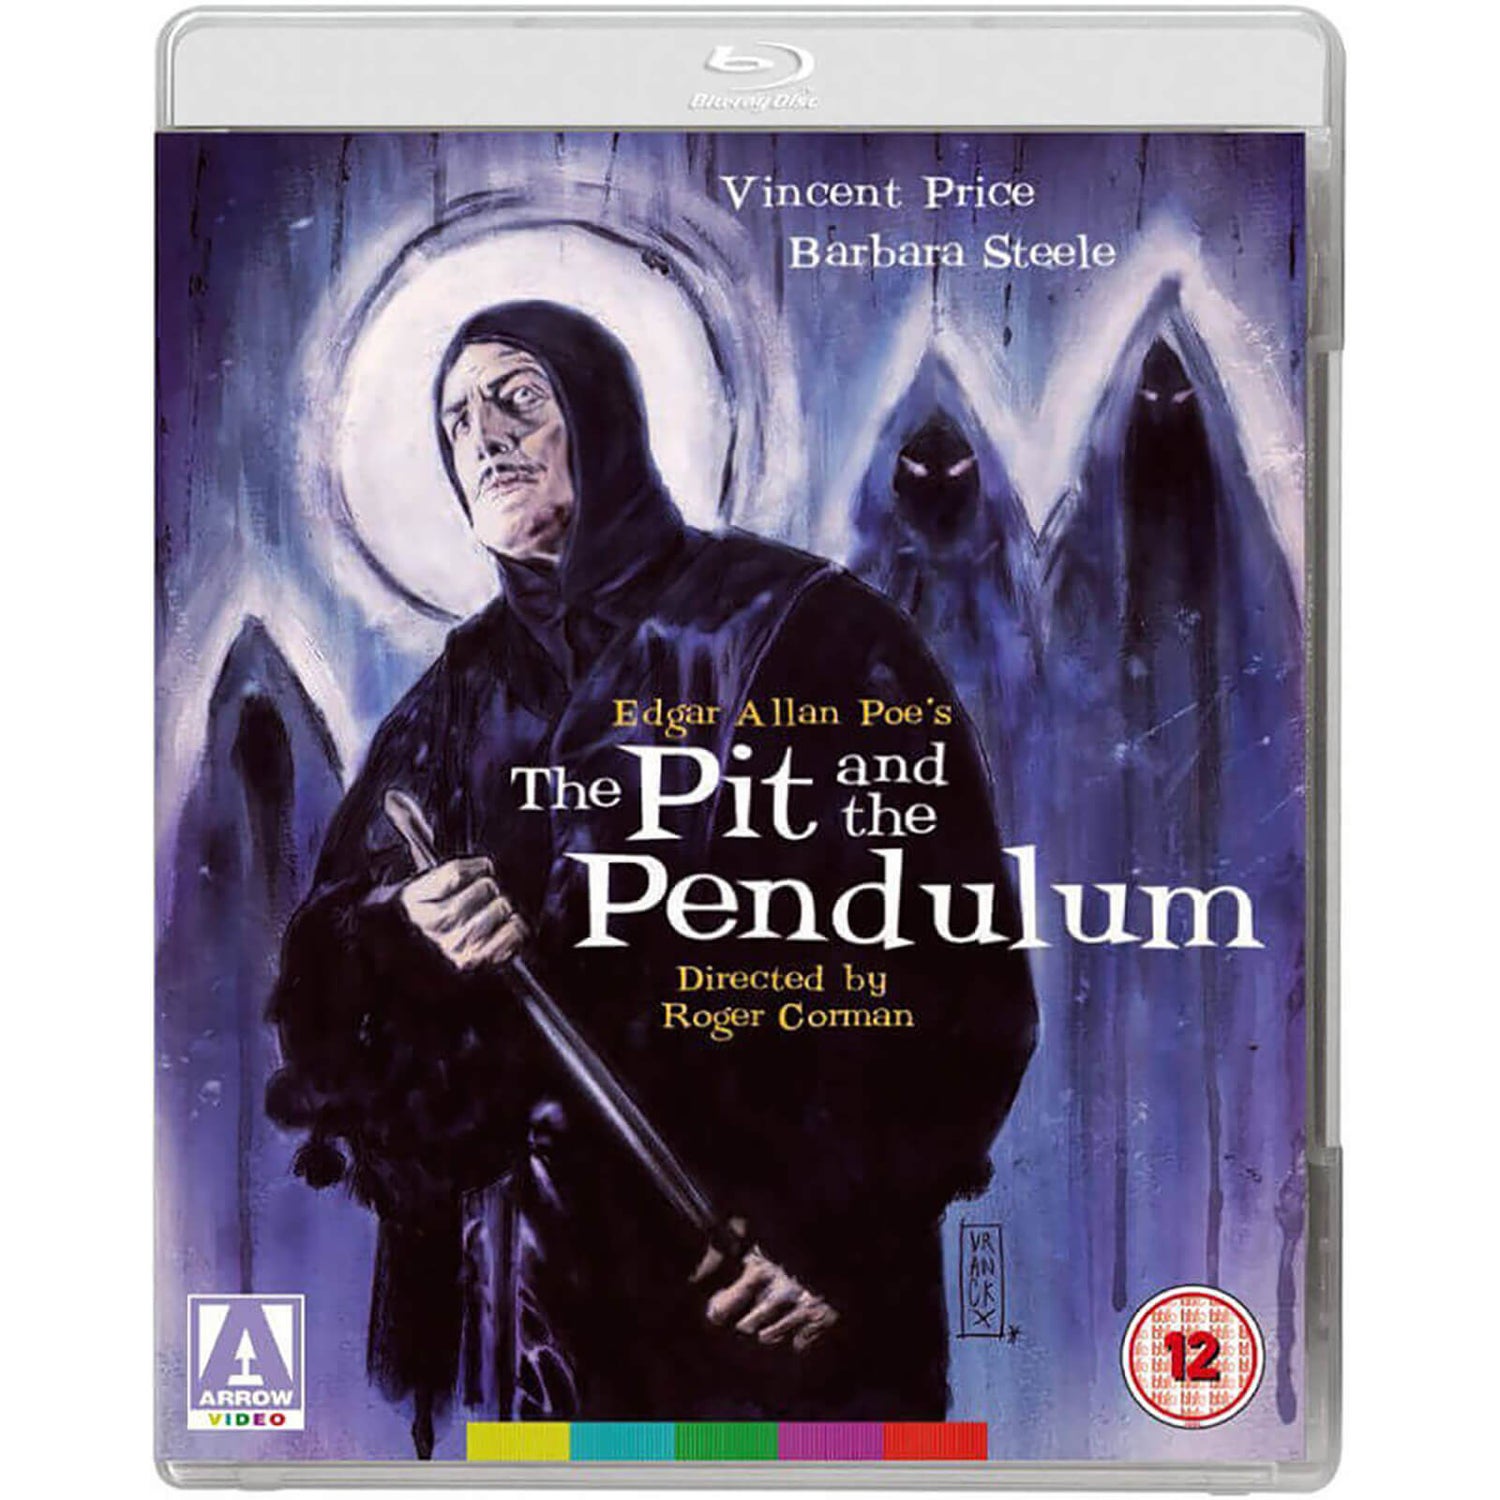 The Pit And The Pendulum Blu-ray